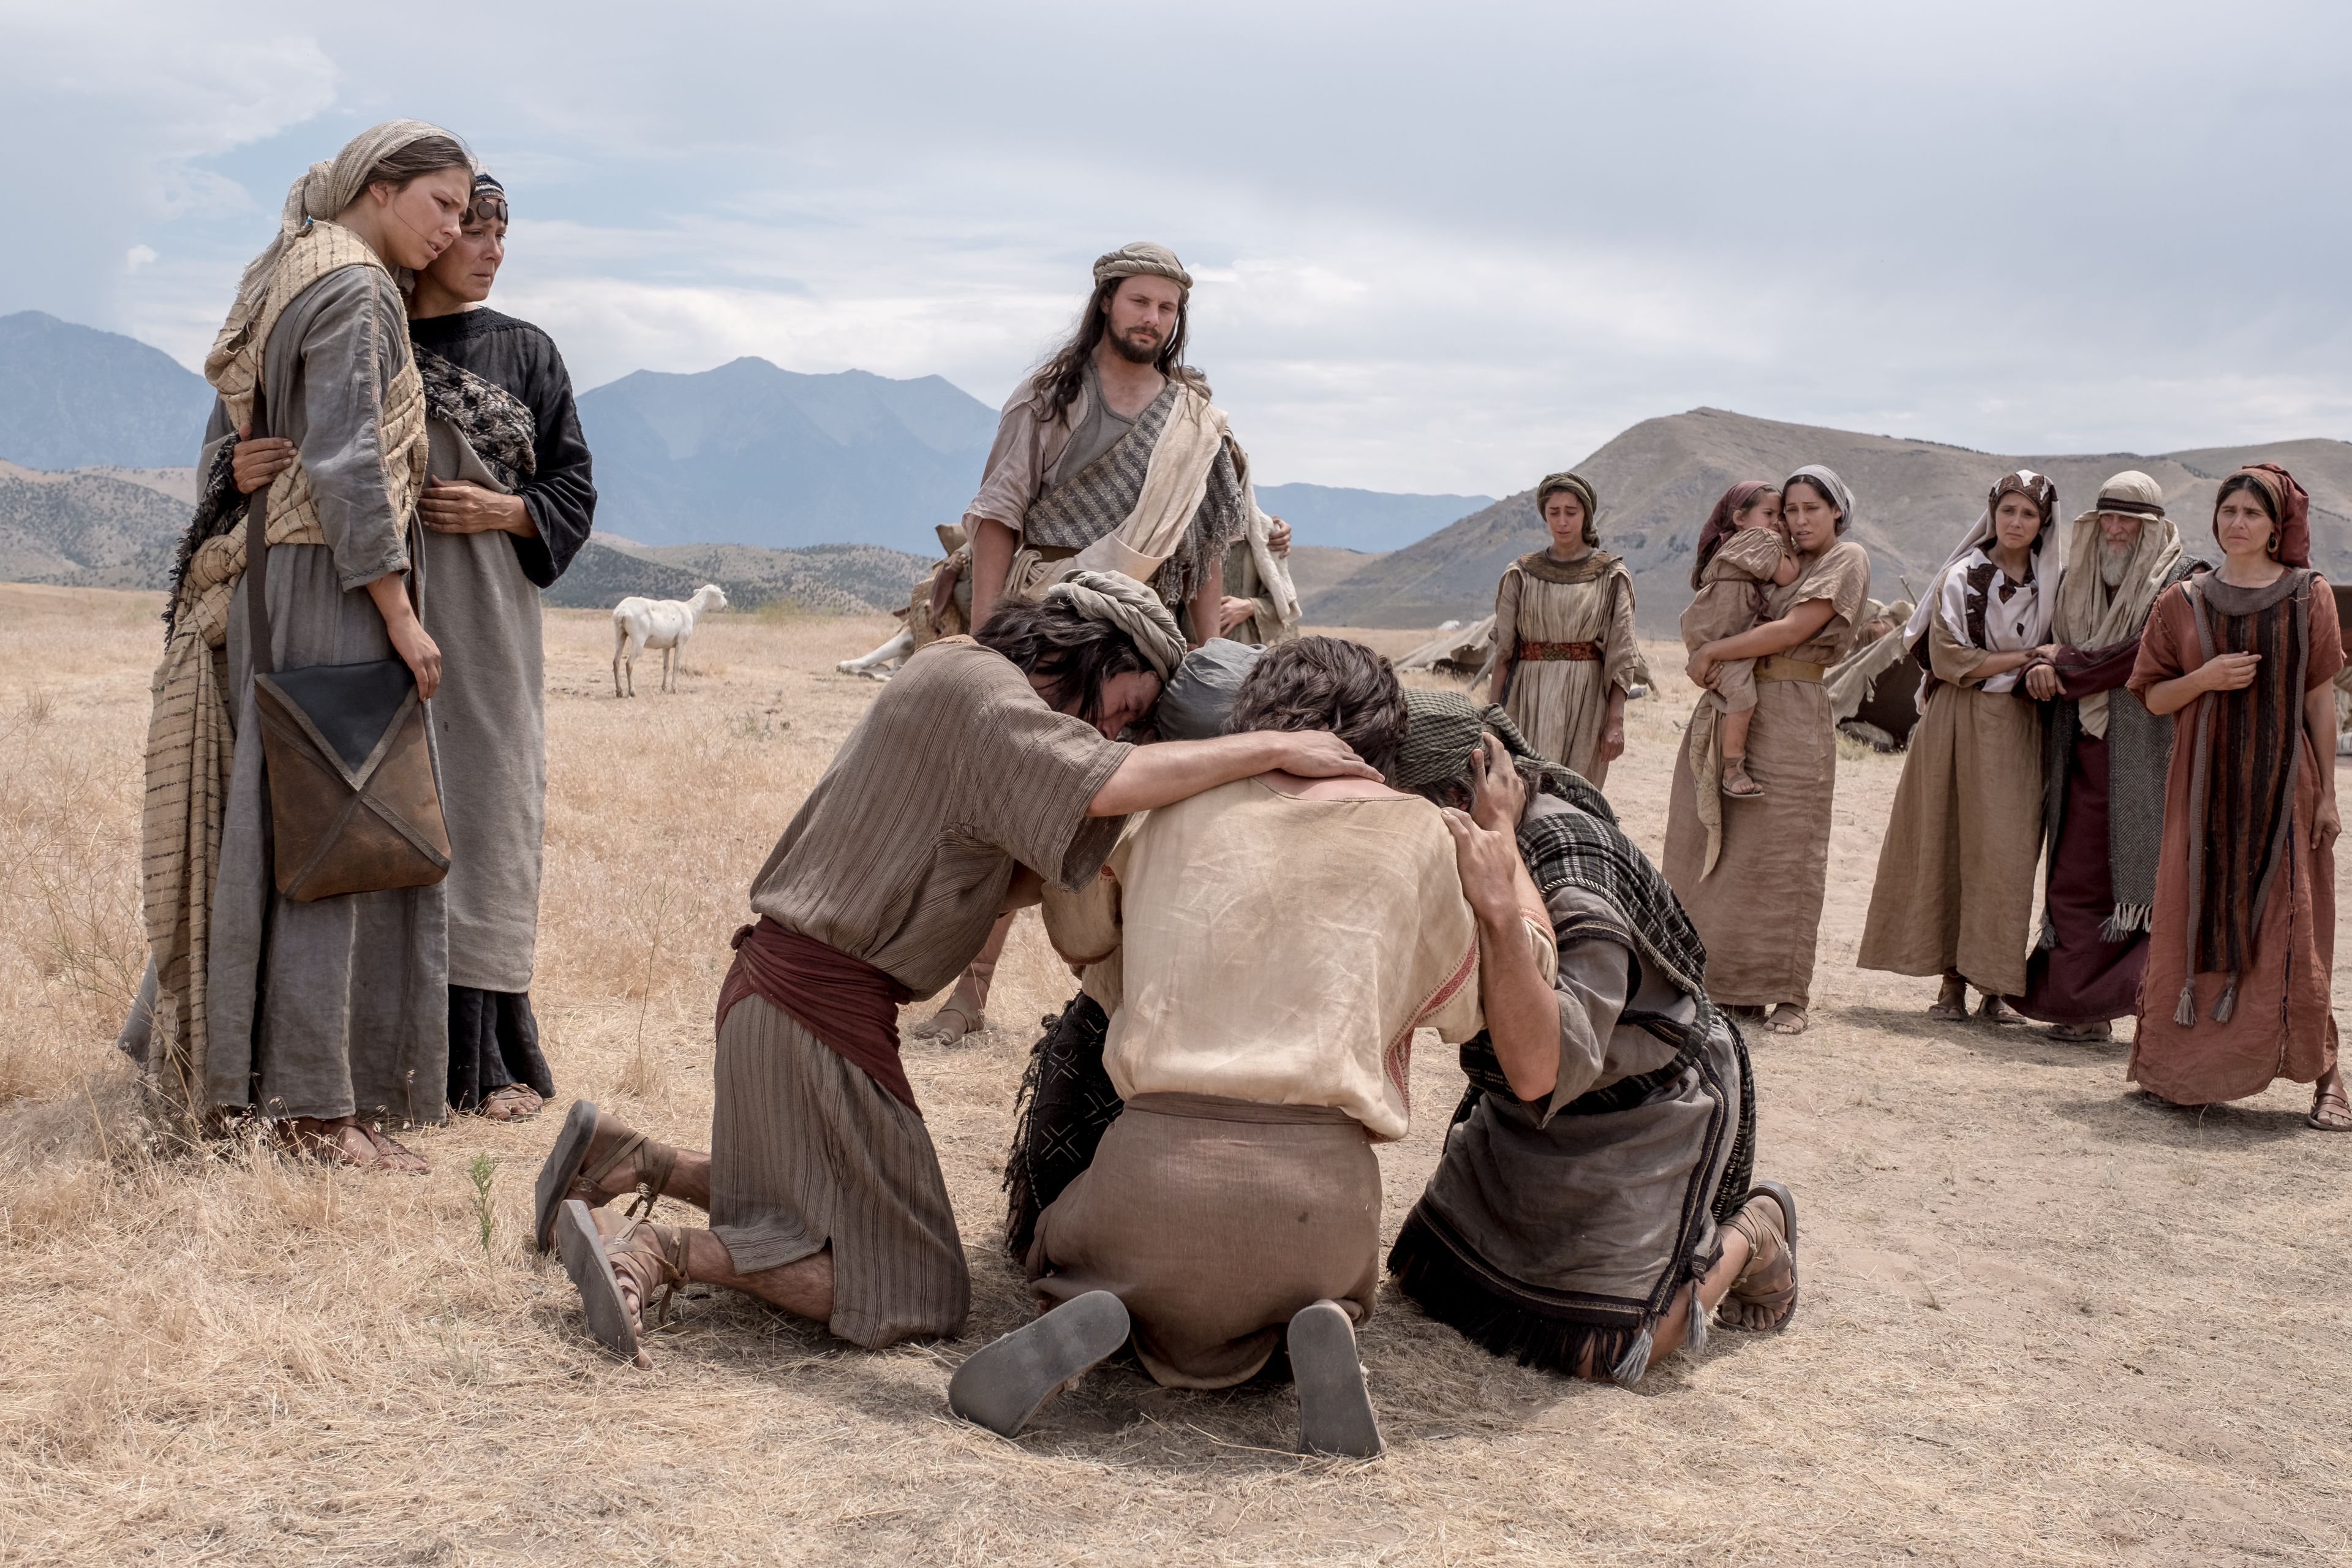 Nephi forgives his older brothers for binding him.